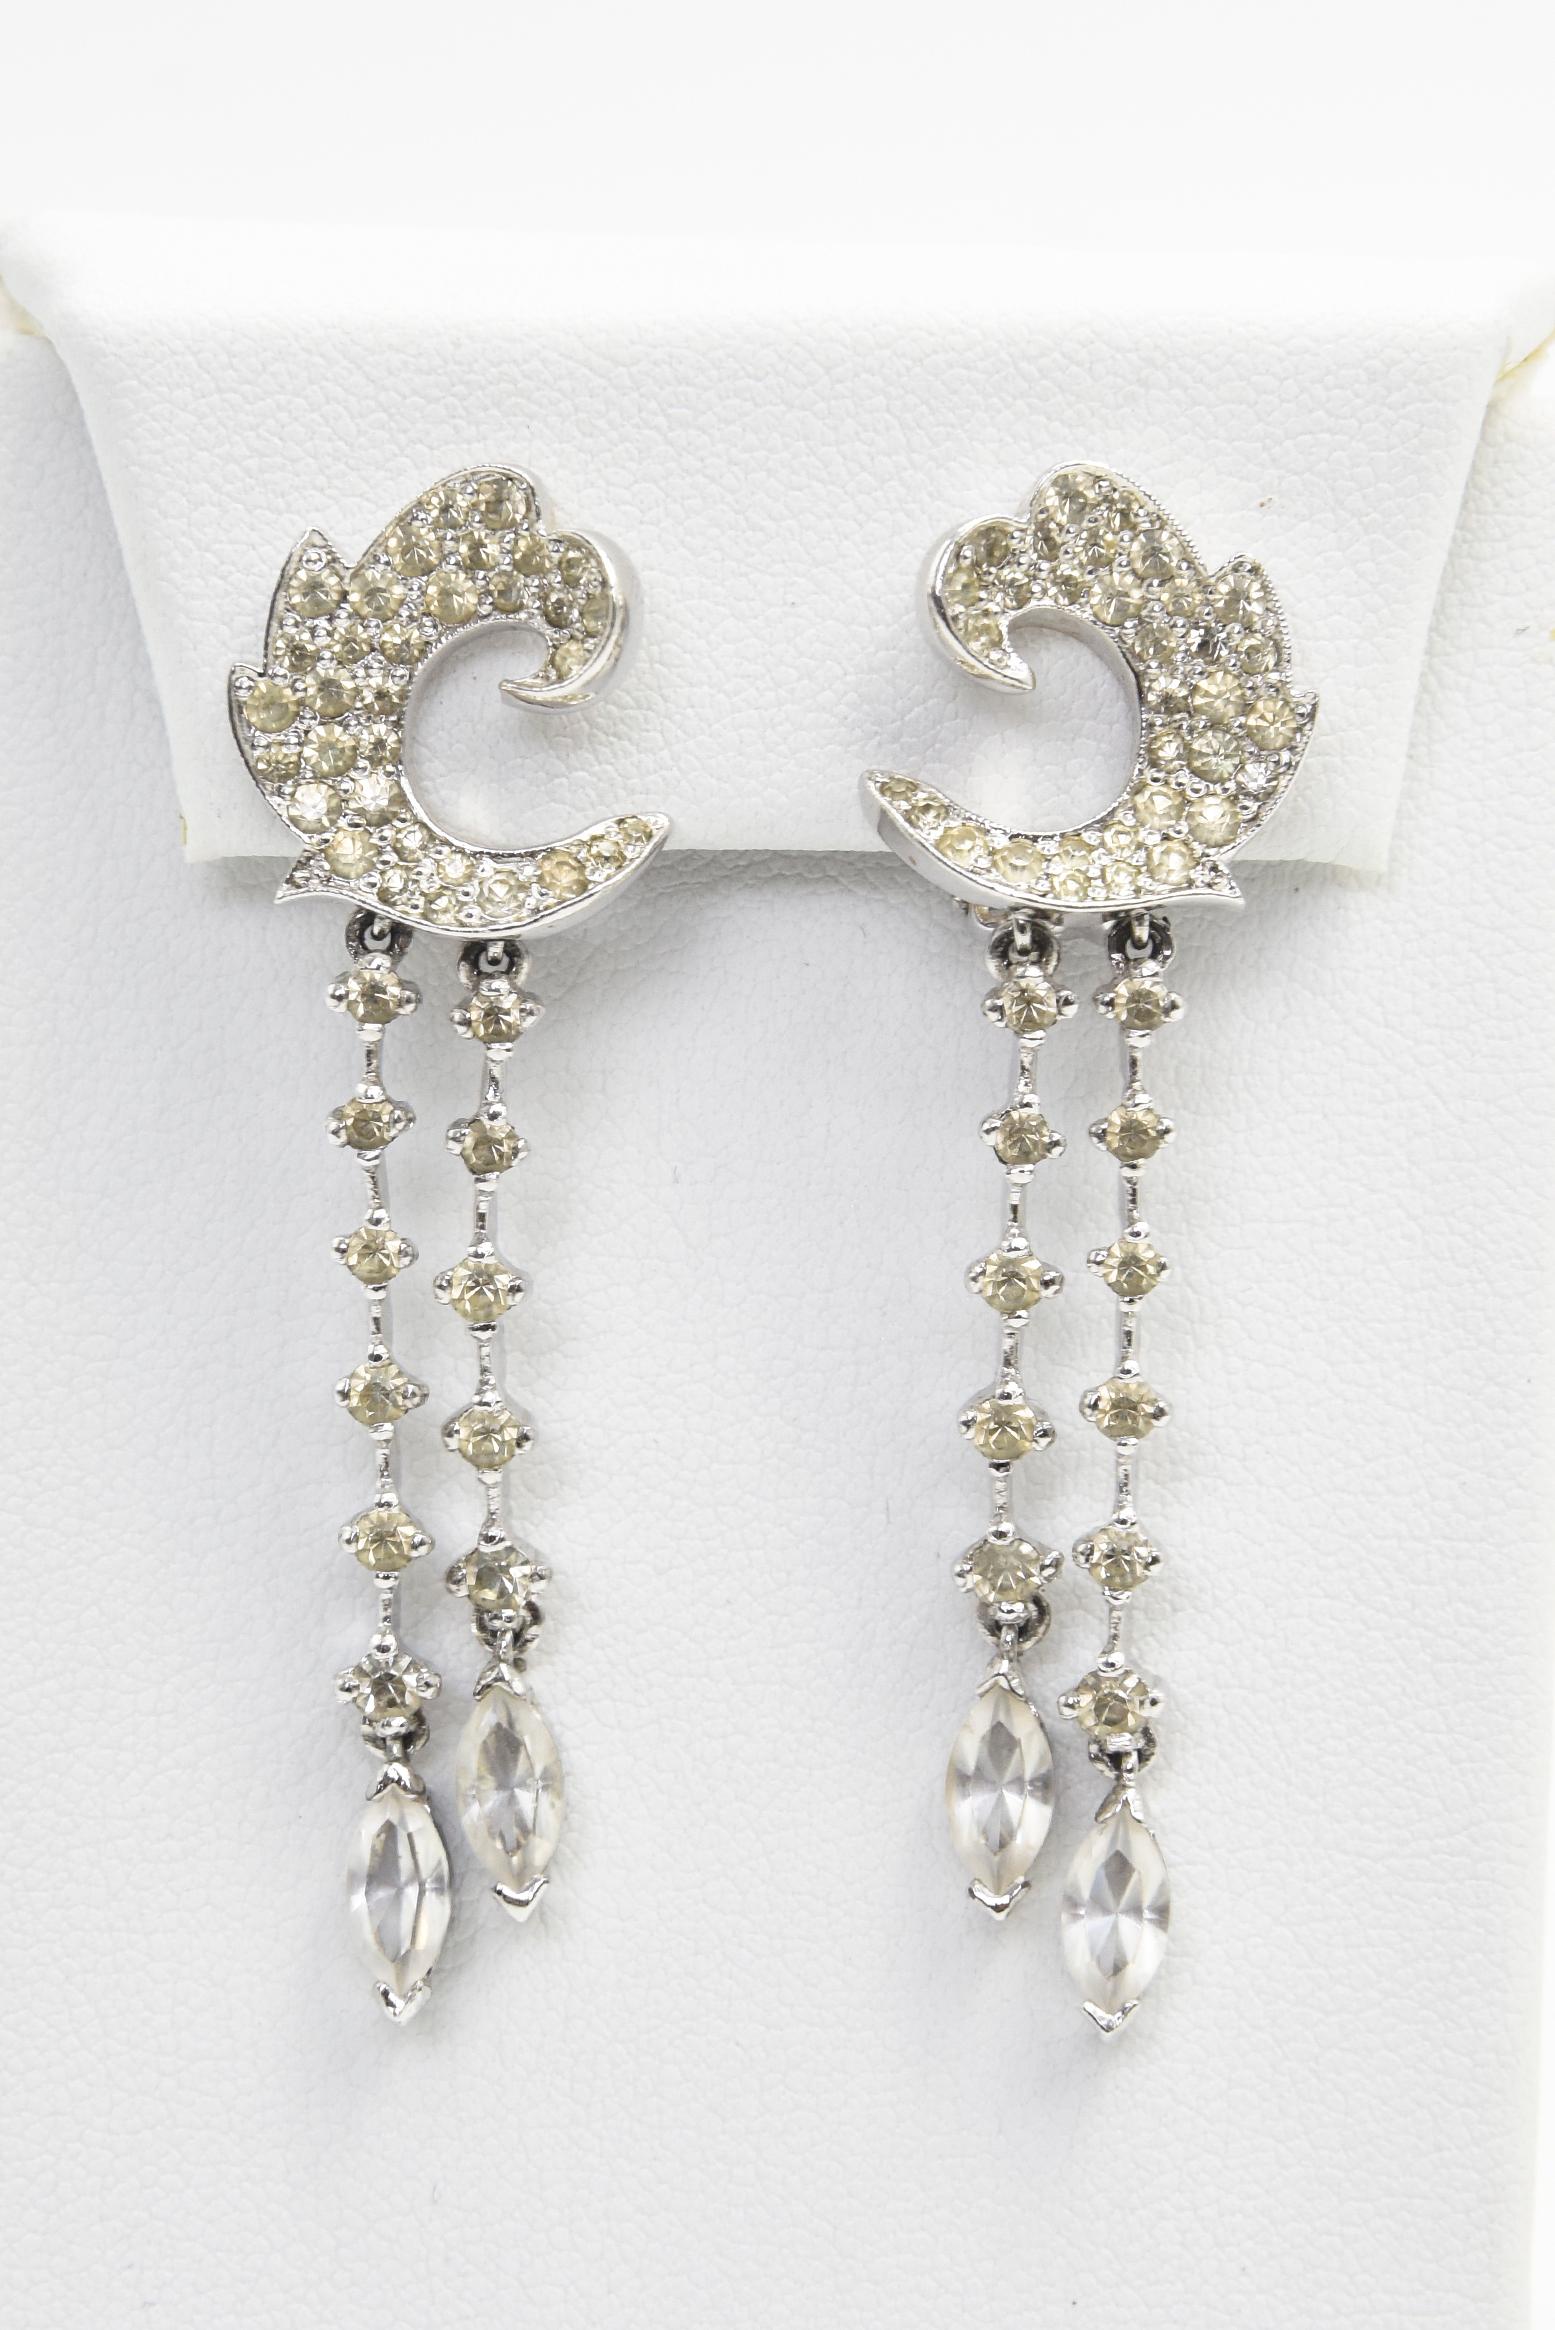 Panetta is truly one of the best of the great pretenders. His costume pieces are finely made to give you the look of real at the price of costume.  In these mid 20th century clip on earrings Panetta uses clear crystals to create a fake diamond drop